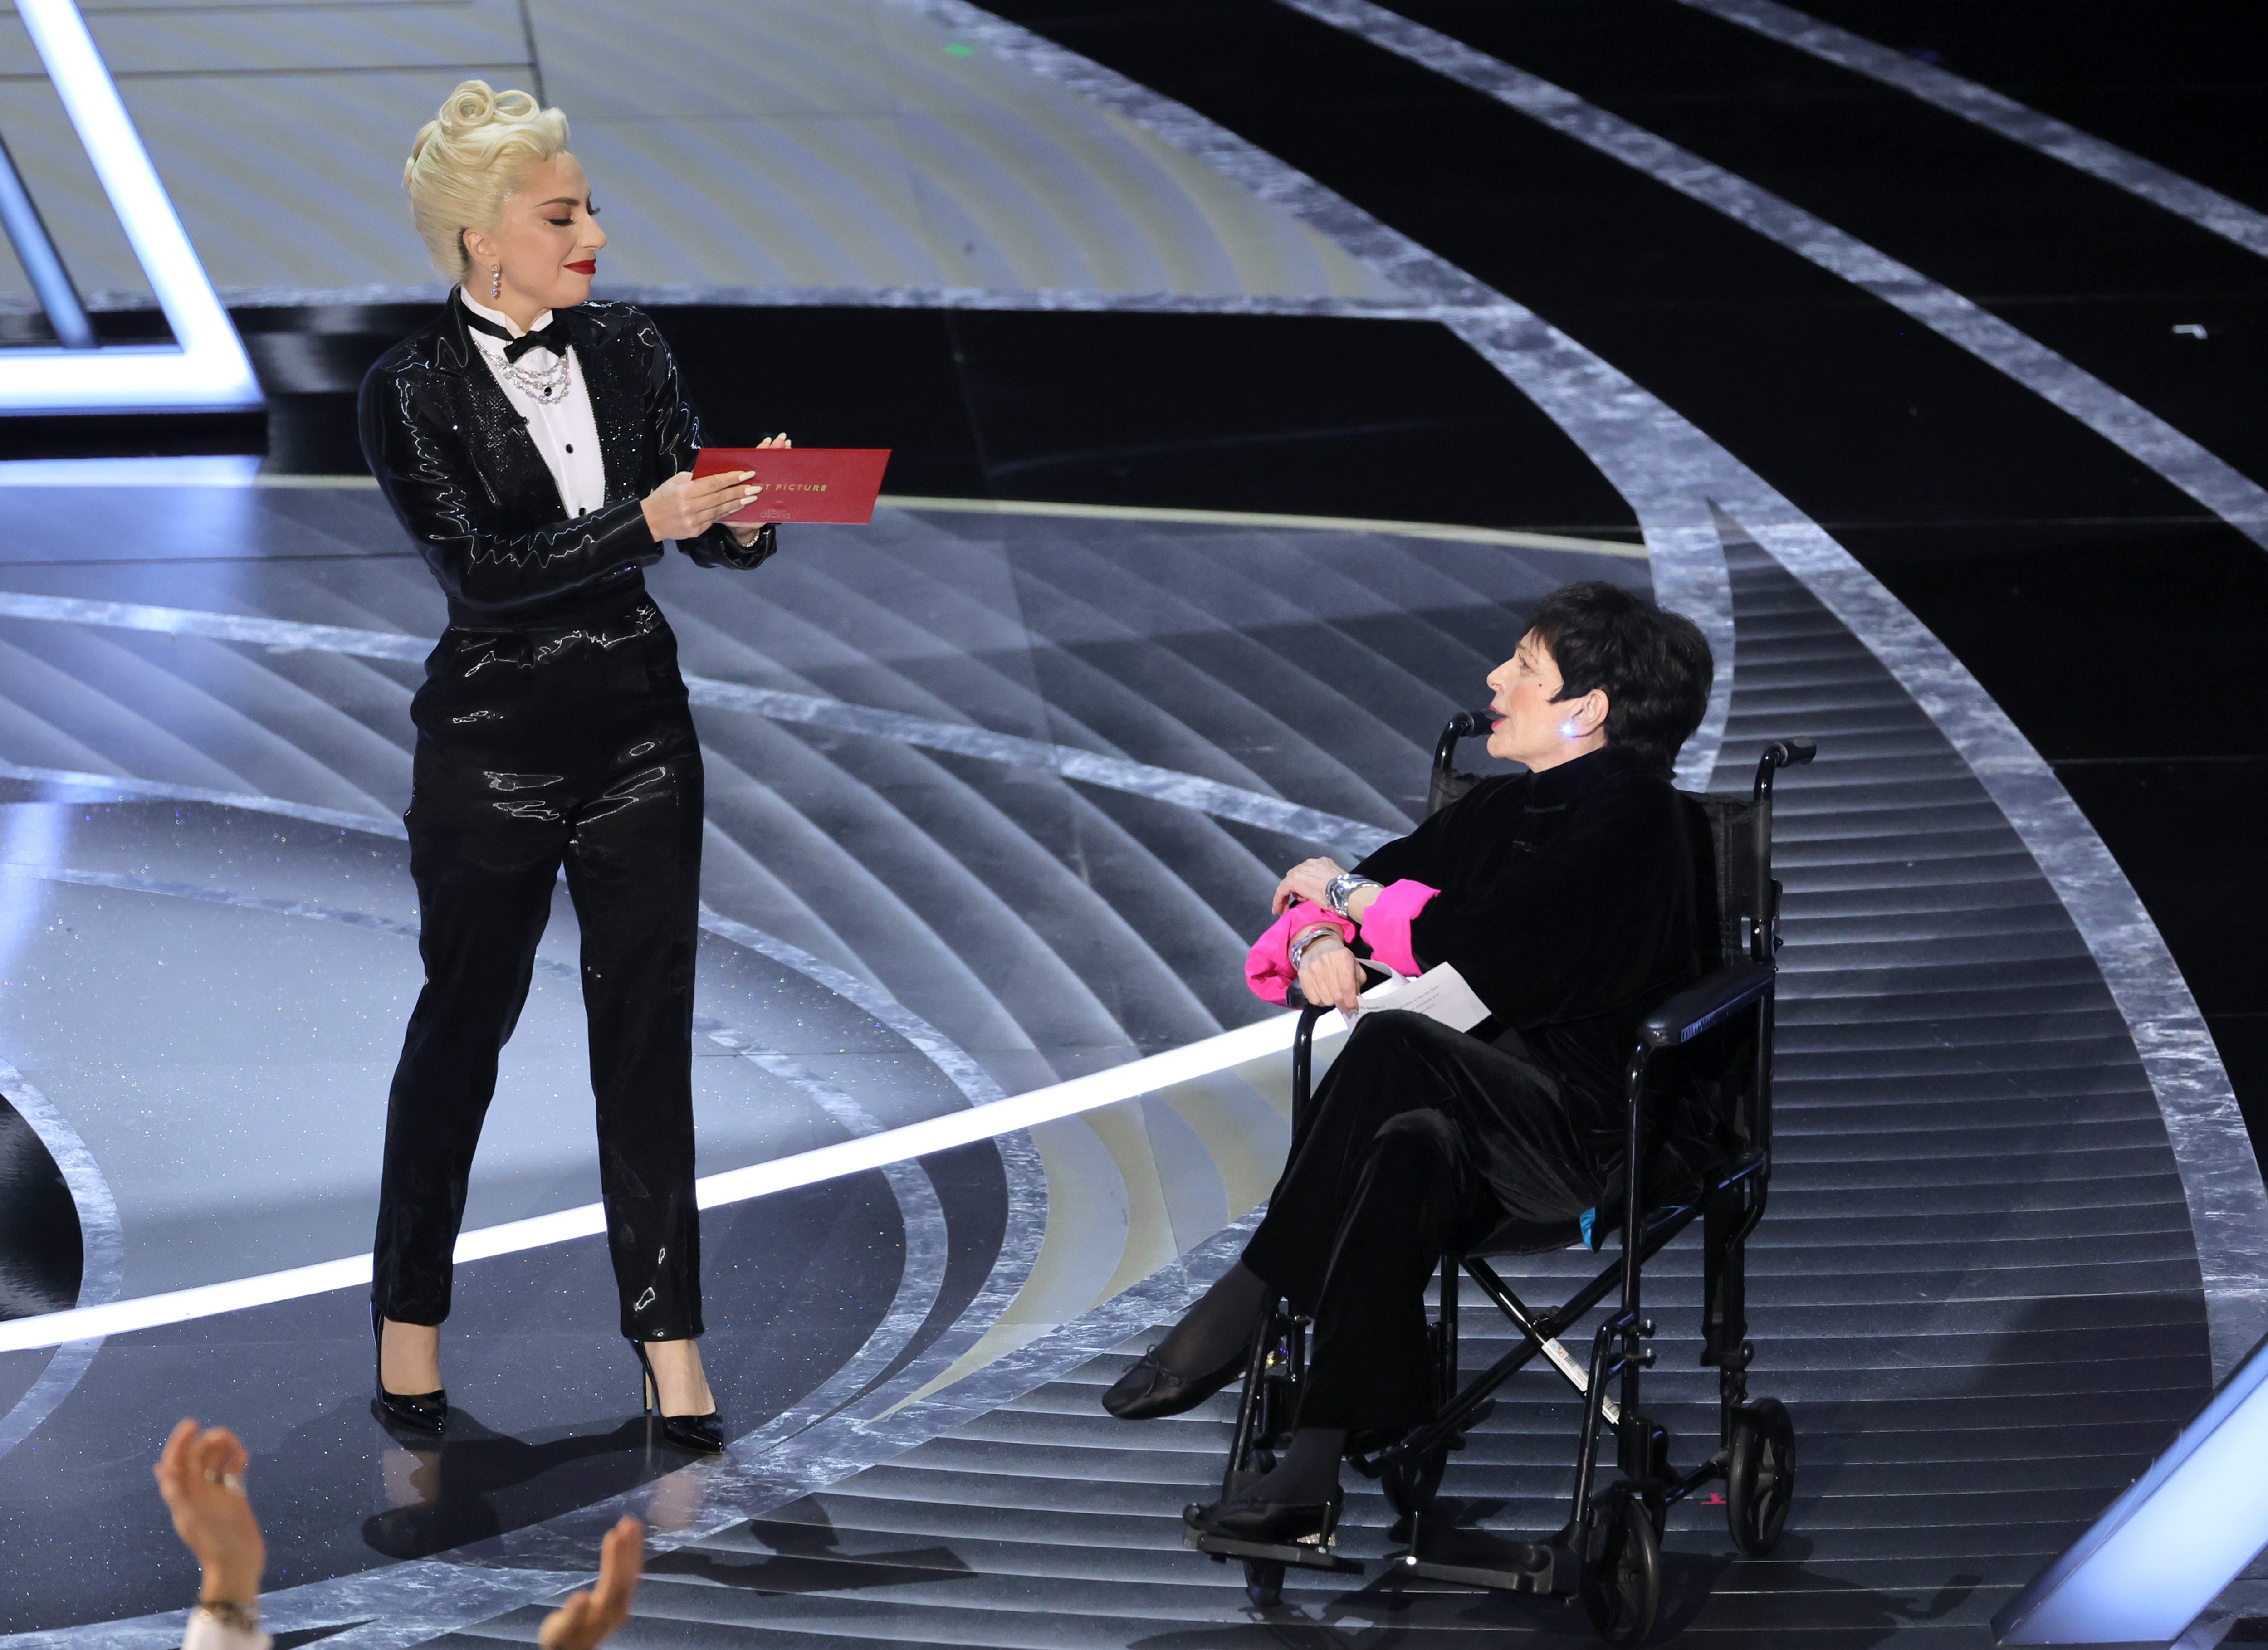 HOLLYWOOD, CALIFORNIA - MARCH 27: (L-R) Lady Gaga and Liza Minnelli speak onstage during the 94th Annual Academy Awards at Dolby Theatre on March 27, 2022 in Hollywood, California. (Photo by Neilson Barnard/Getty Images) (Foto: Getty Images)